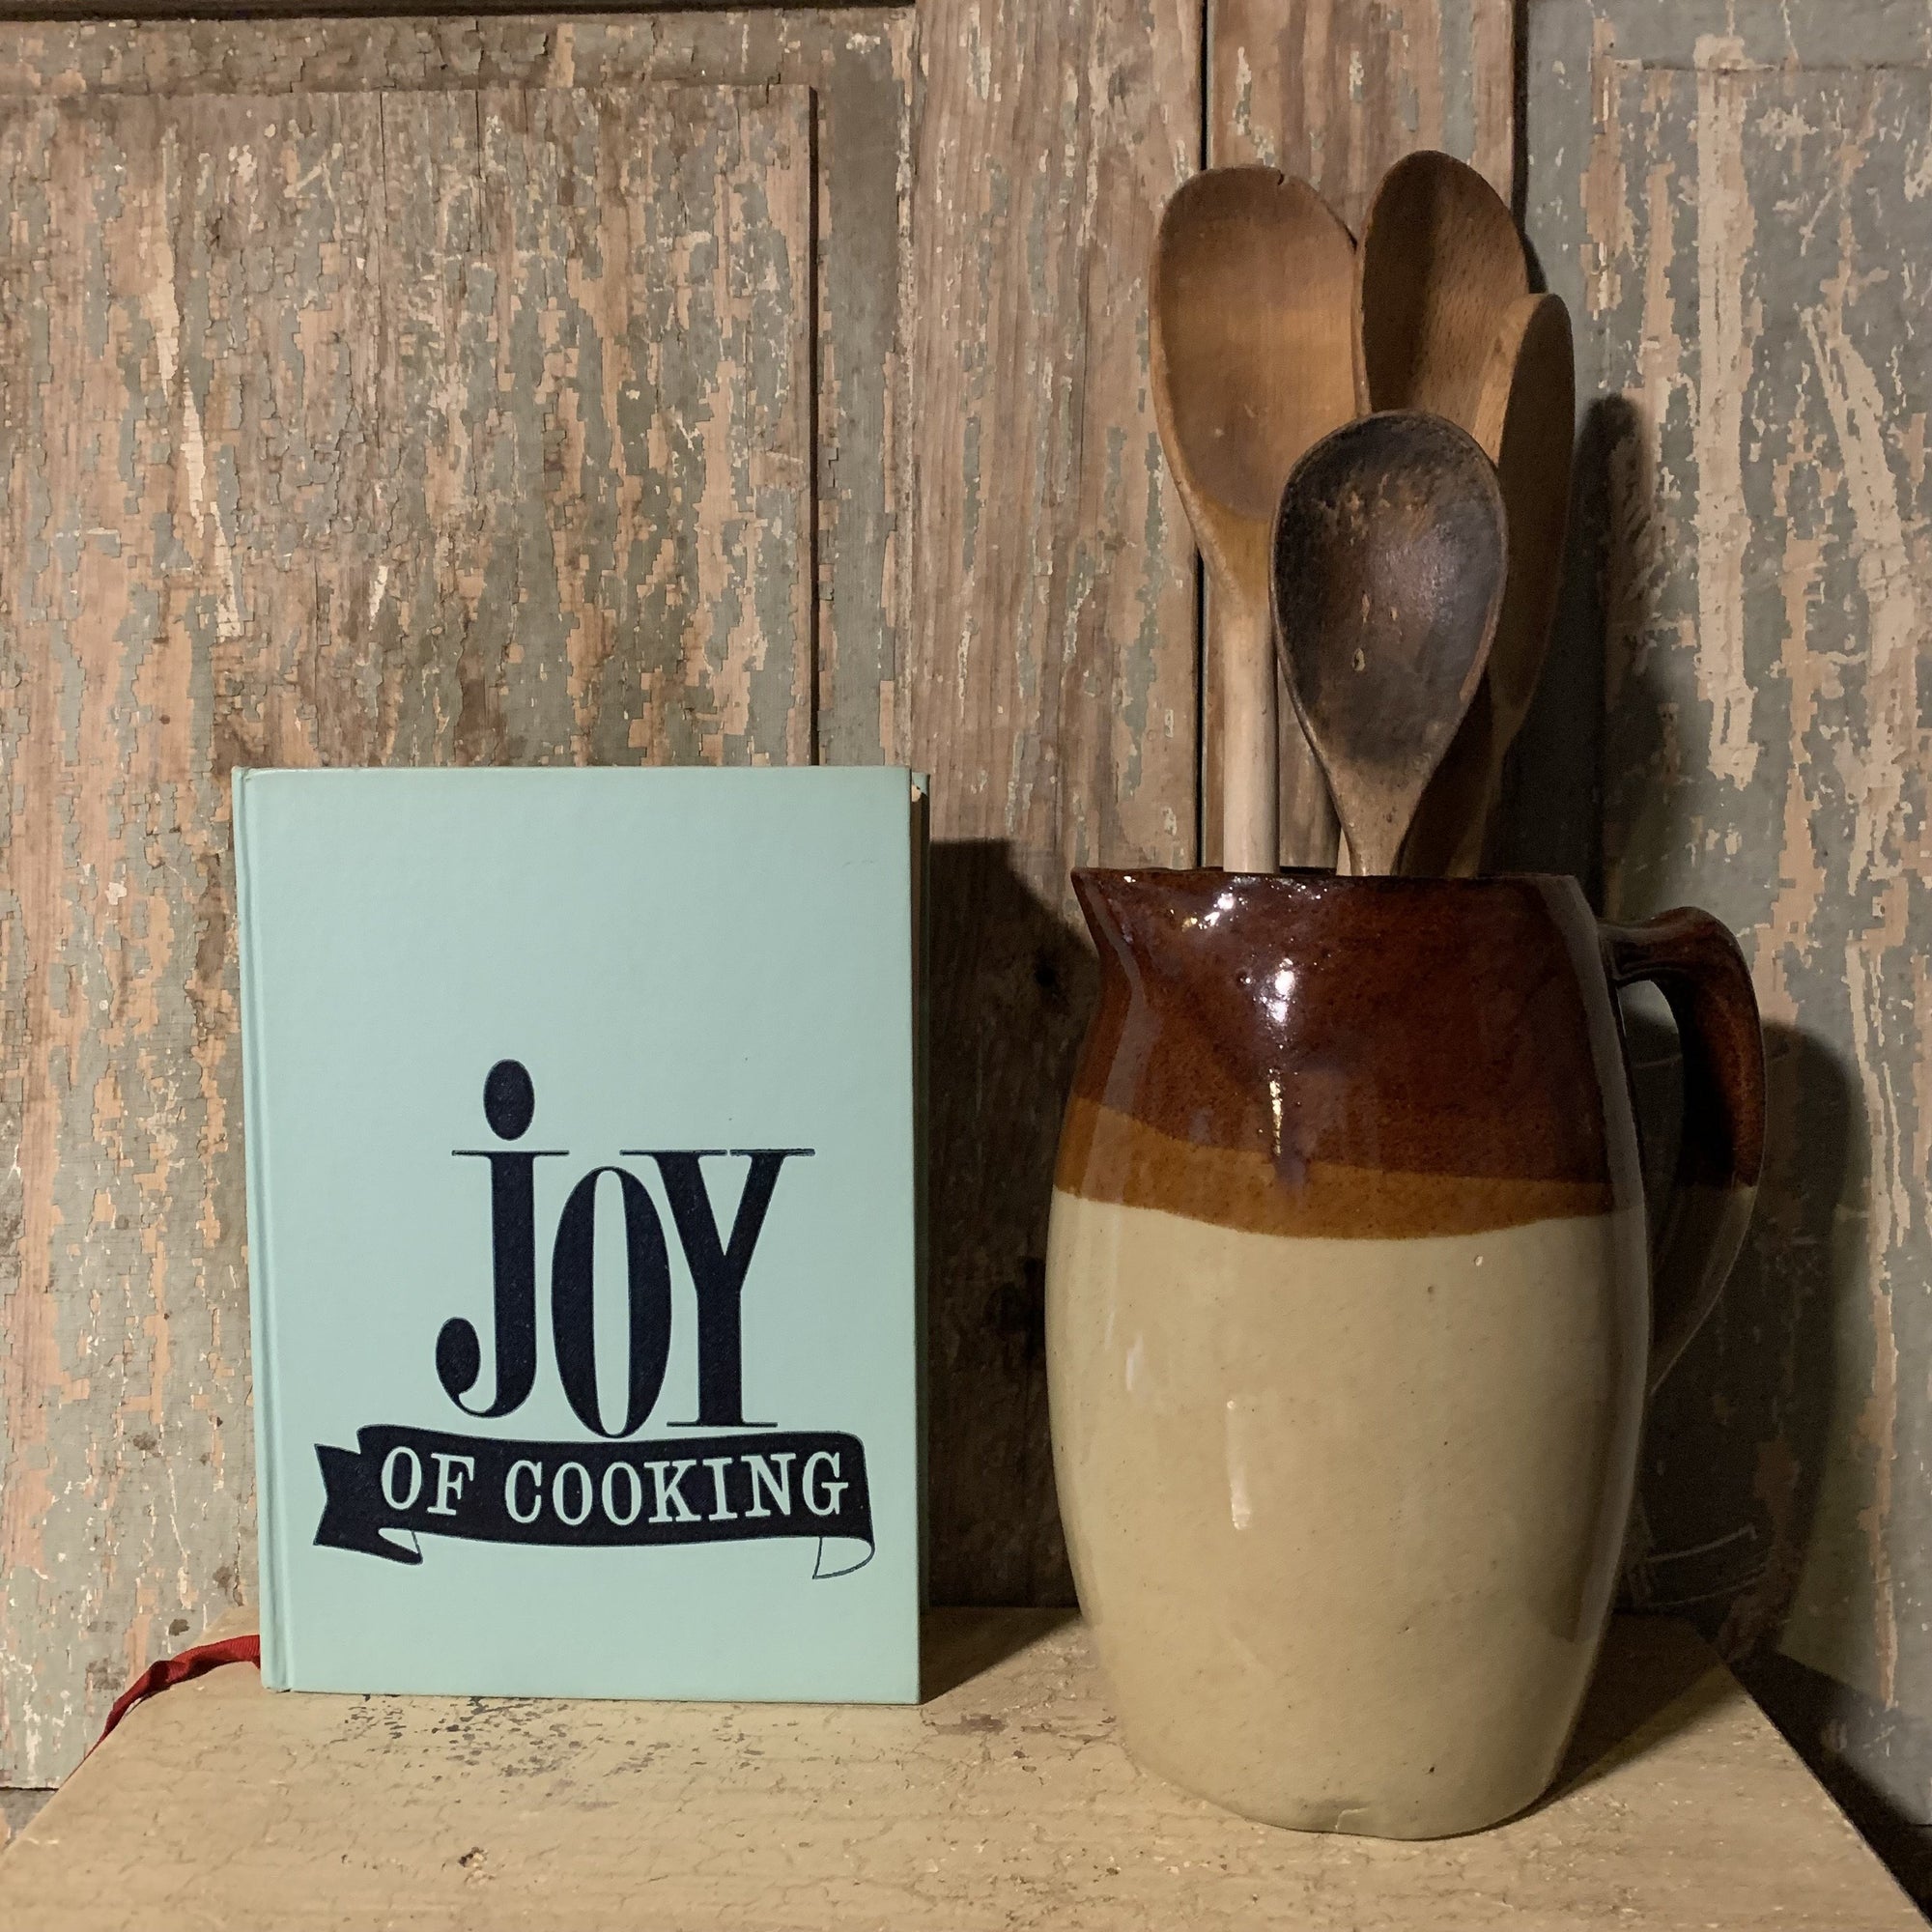 Log Cabin Vintage - Vintage Cookbook, Cookbook, Swiss Army Knife of Cookbooks - Joy of Cooking 1972 Turquoise Blue Edition - view of the front cover